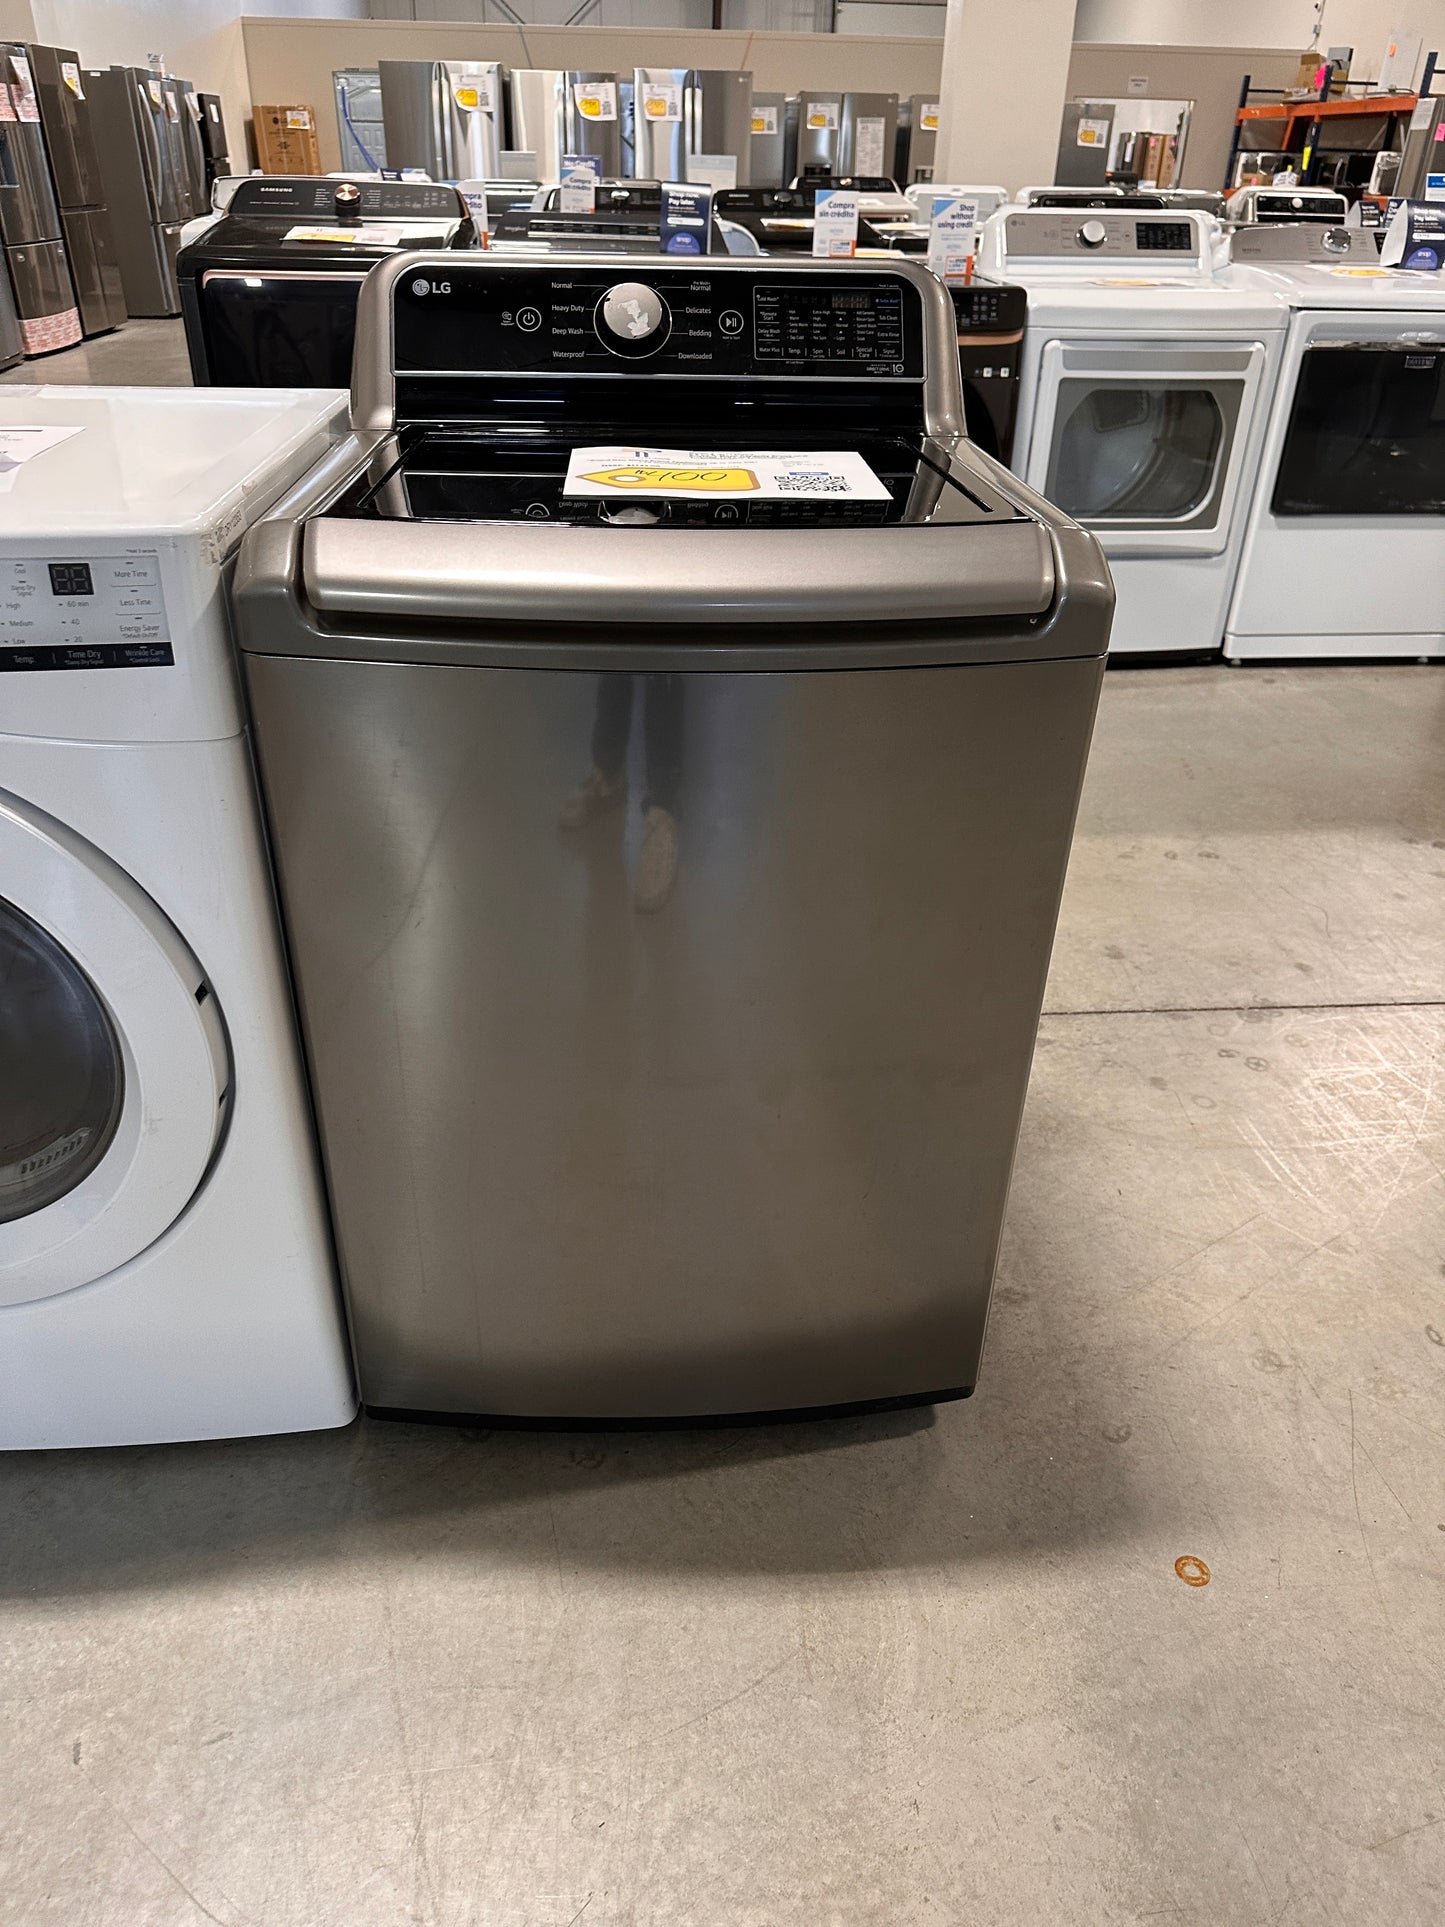 GREAT NEW LG TOP LOAD SMART WASHER MODEL:WT7400CV   WAS13164